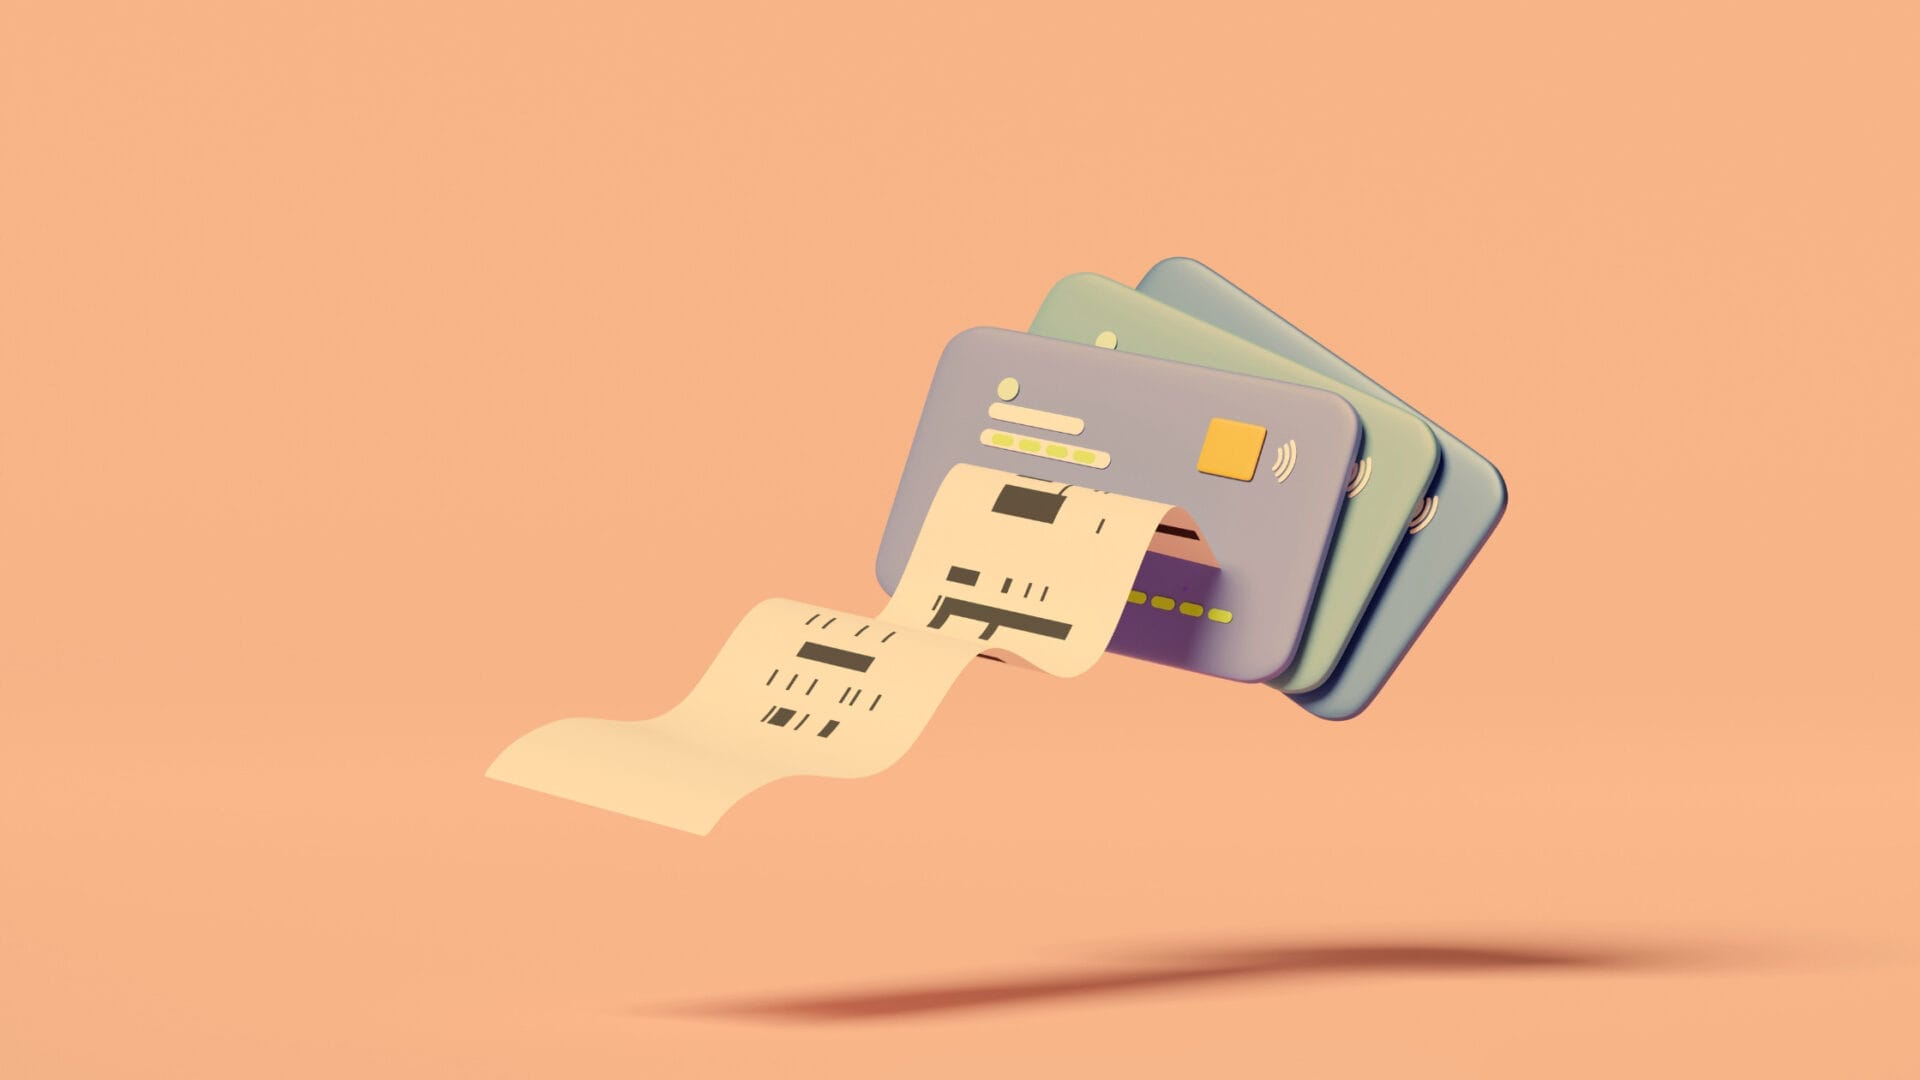 Voucher code printing out of a credit card